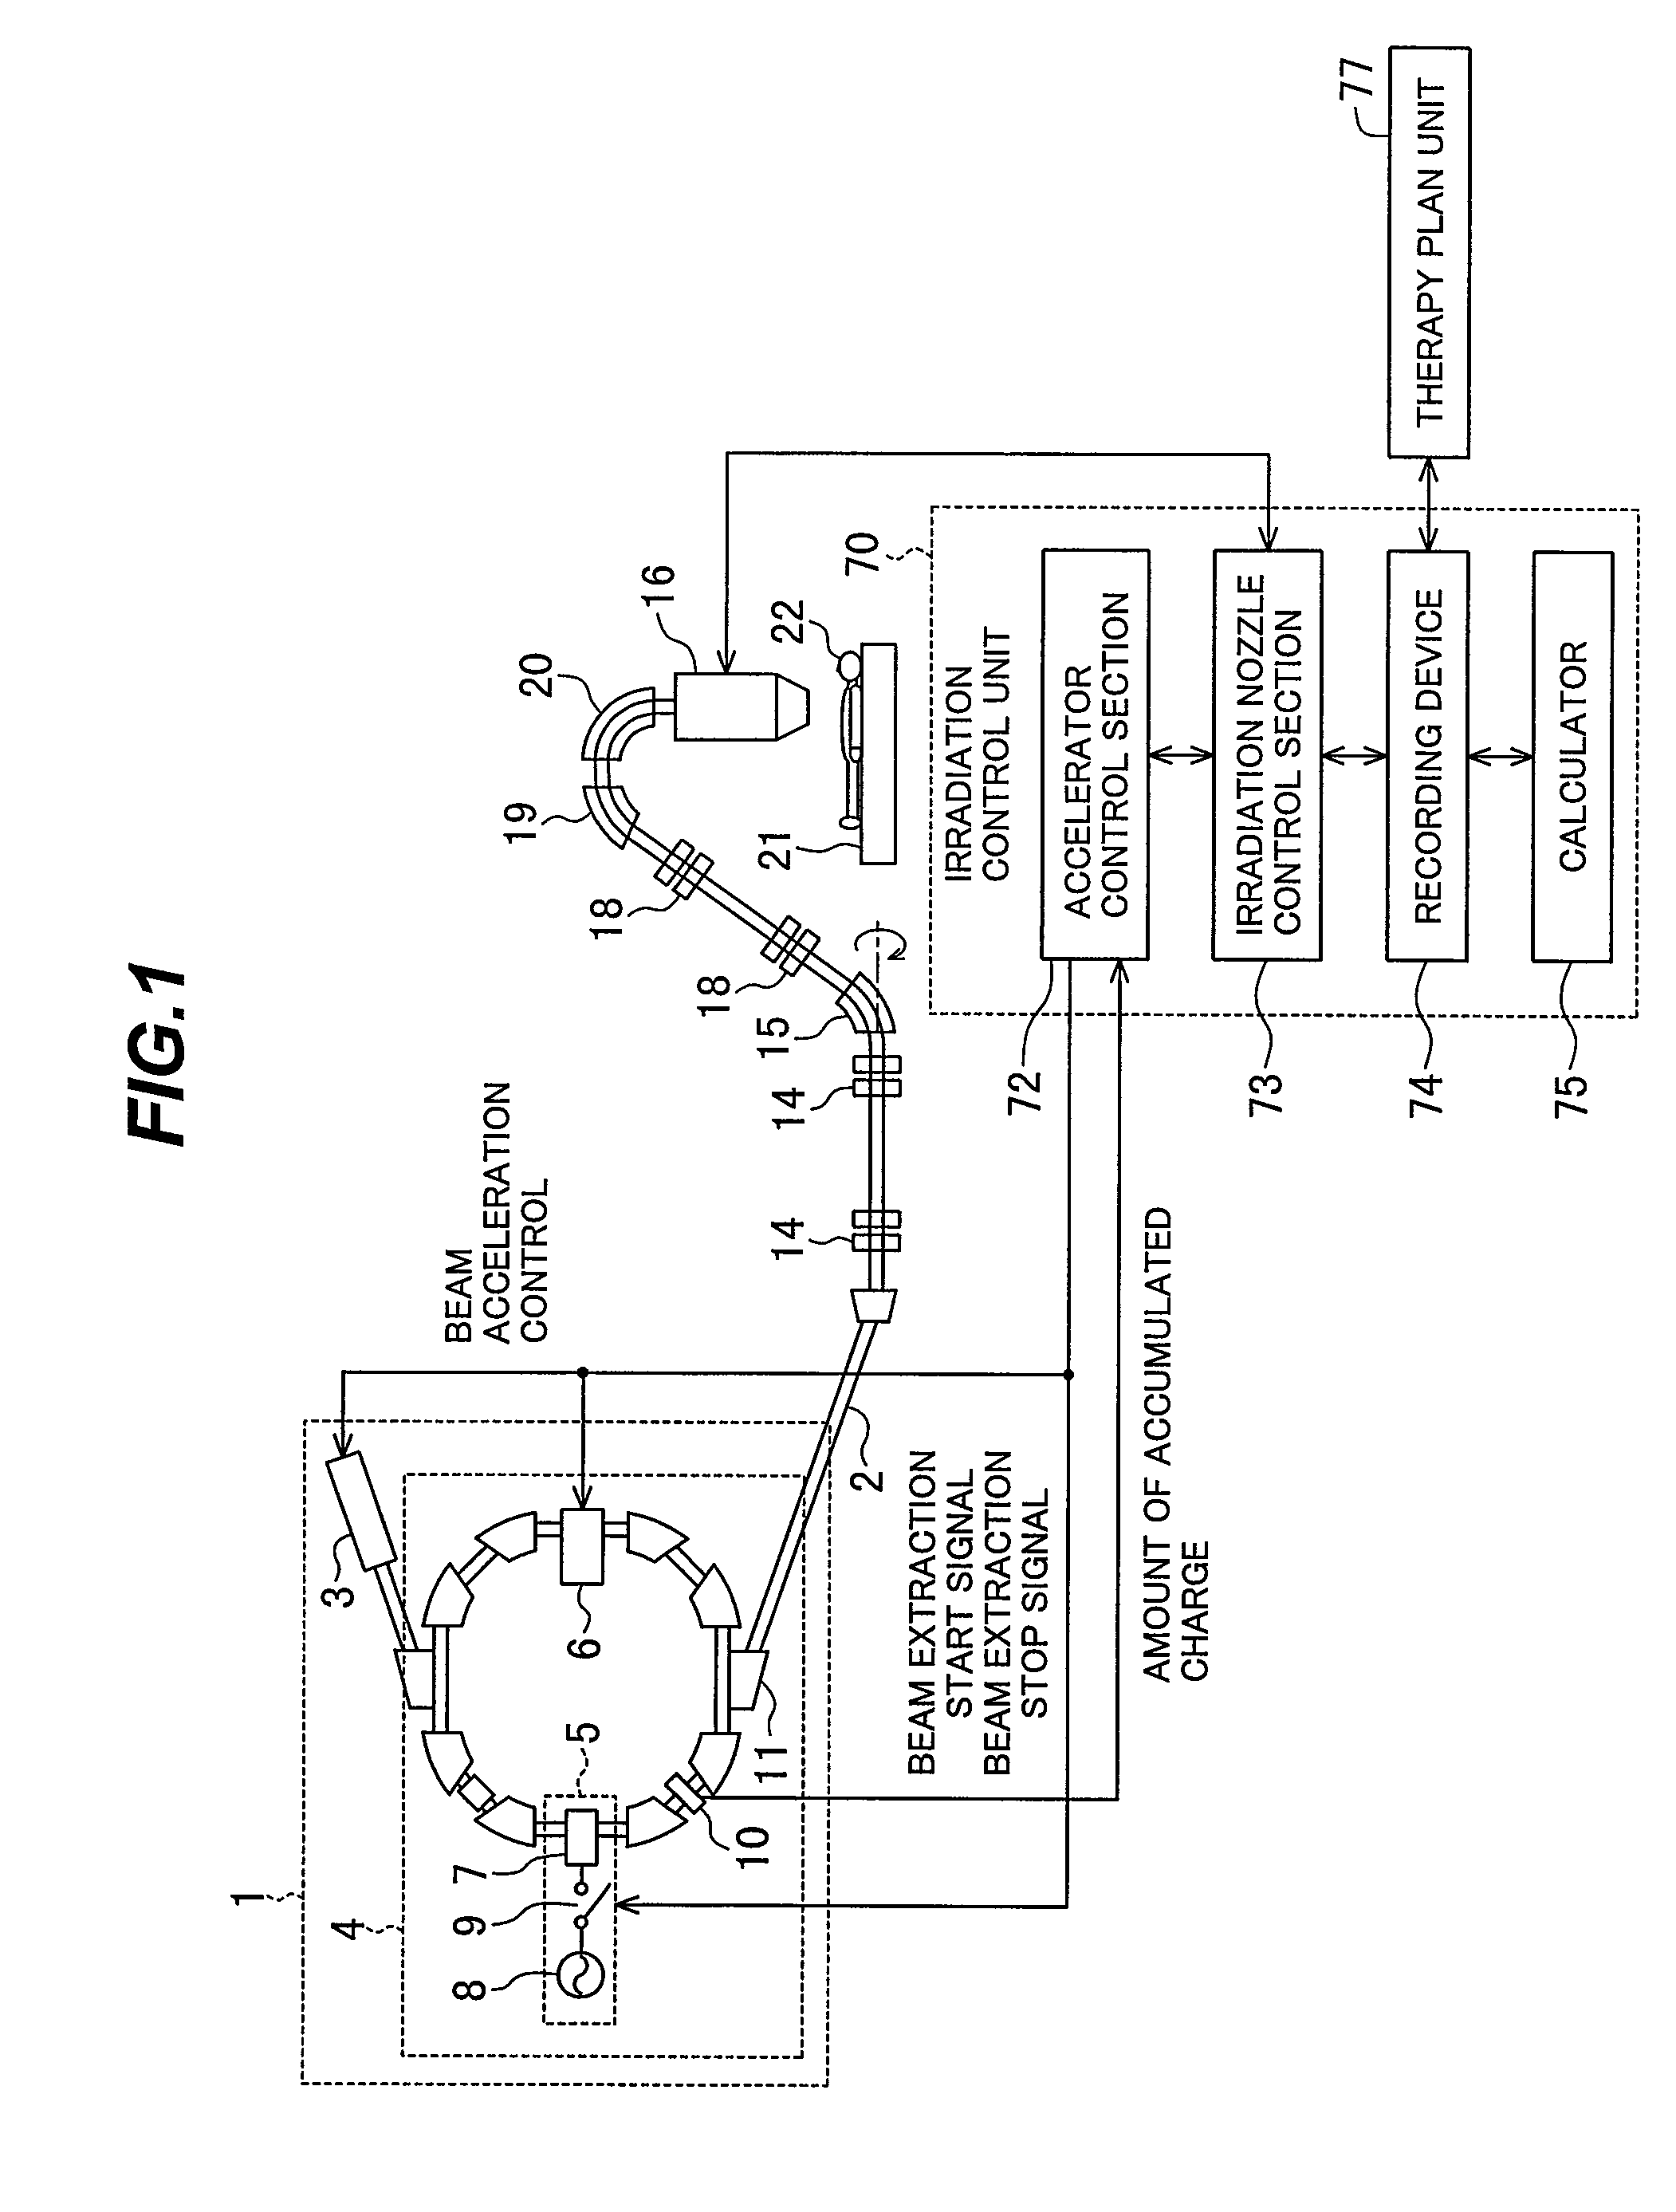 Charged particle irradiation system